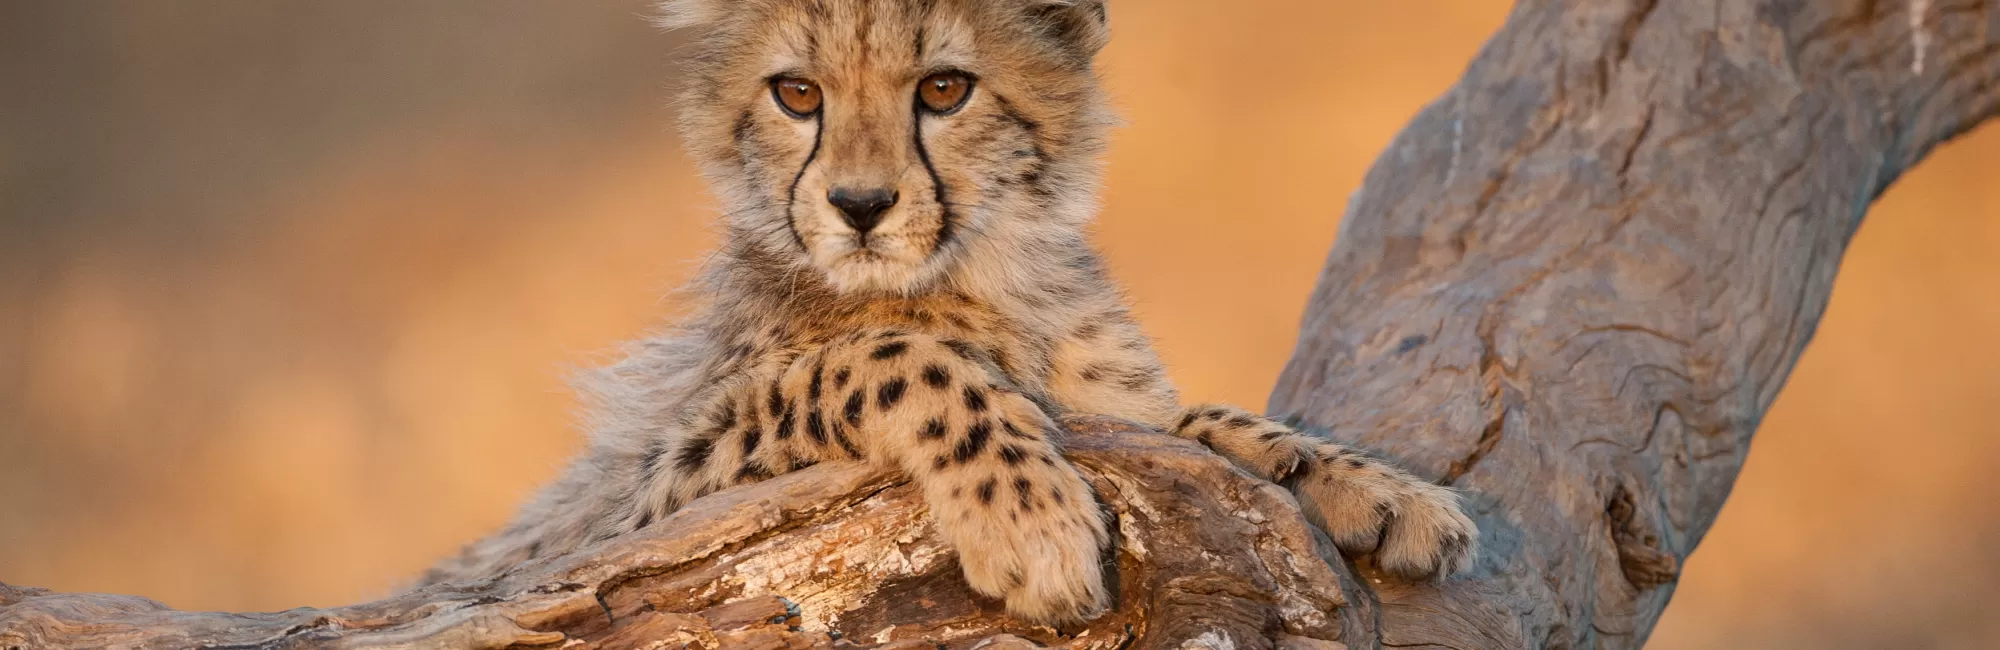 Baby cheetah, Kruger National Park, South Africa (iStock.com/StuPorts)